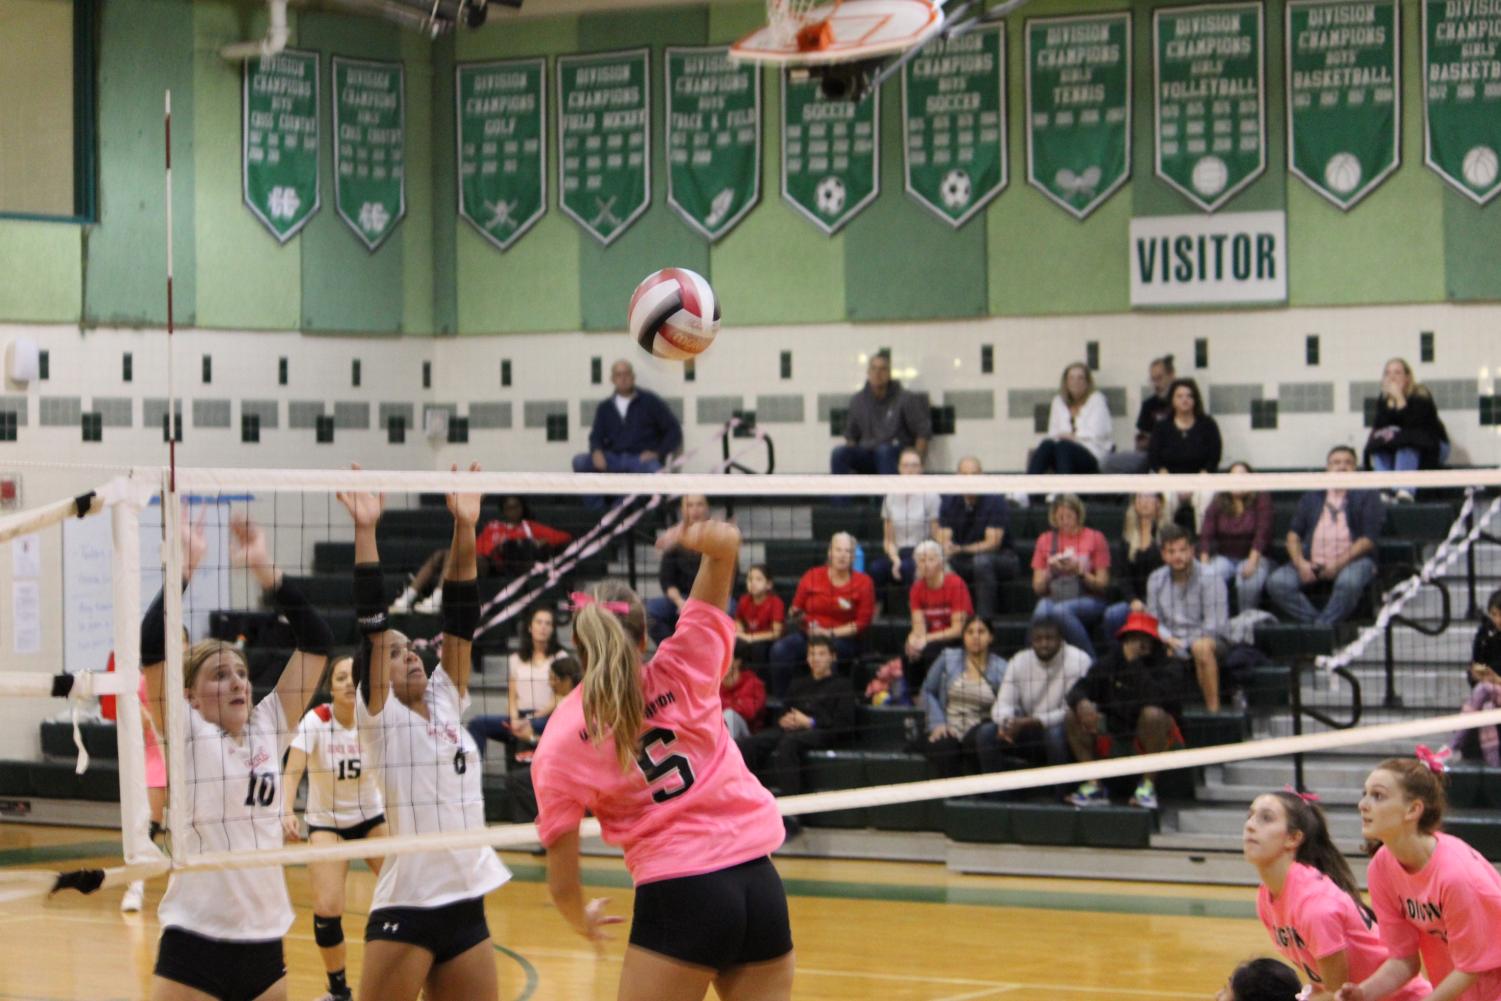 Girls+volleyball+beat+Quince+Orchard+Cougars+3-0%2C+look+to+finish+season+strong